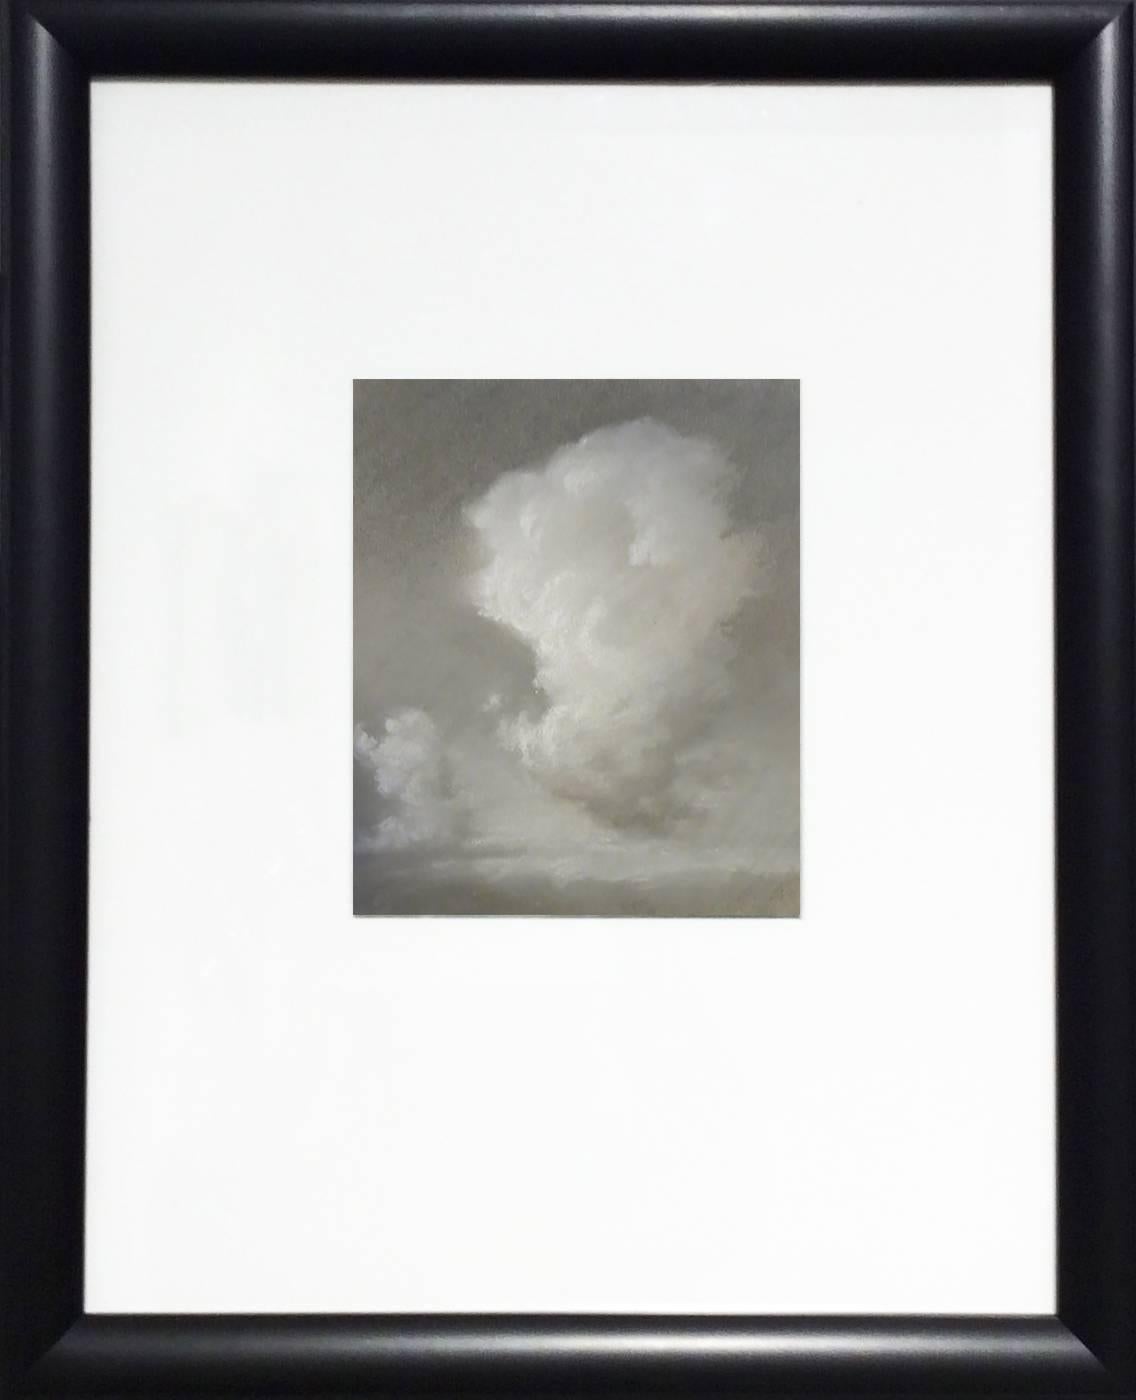 Rising (Black & White Charcoal Landscape Drawing of Sunlit Clouds, Framed) - Art by Jane Bloodgood-Abrams